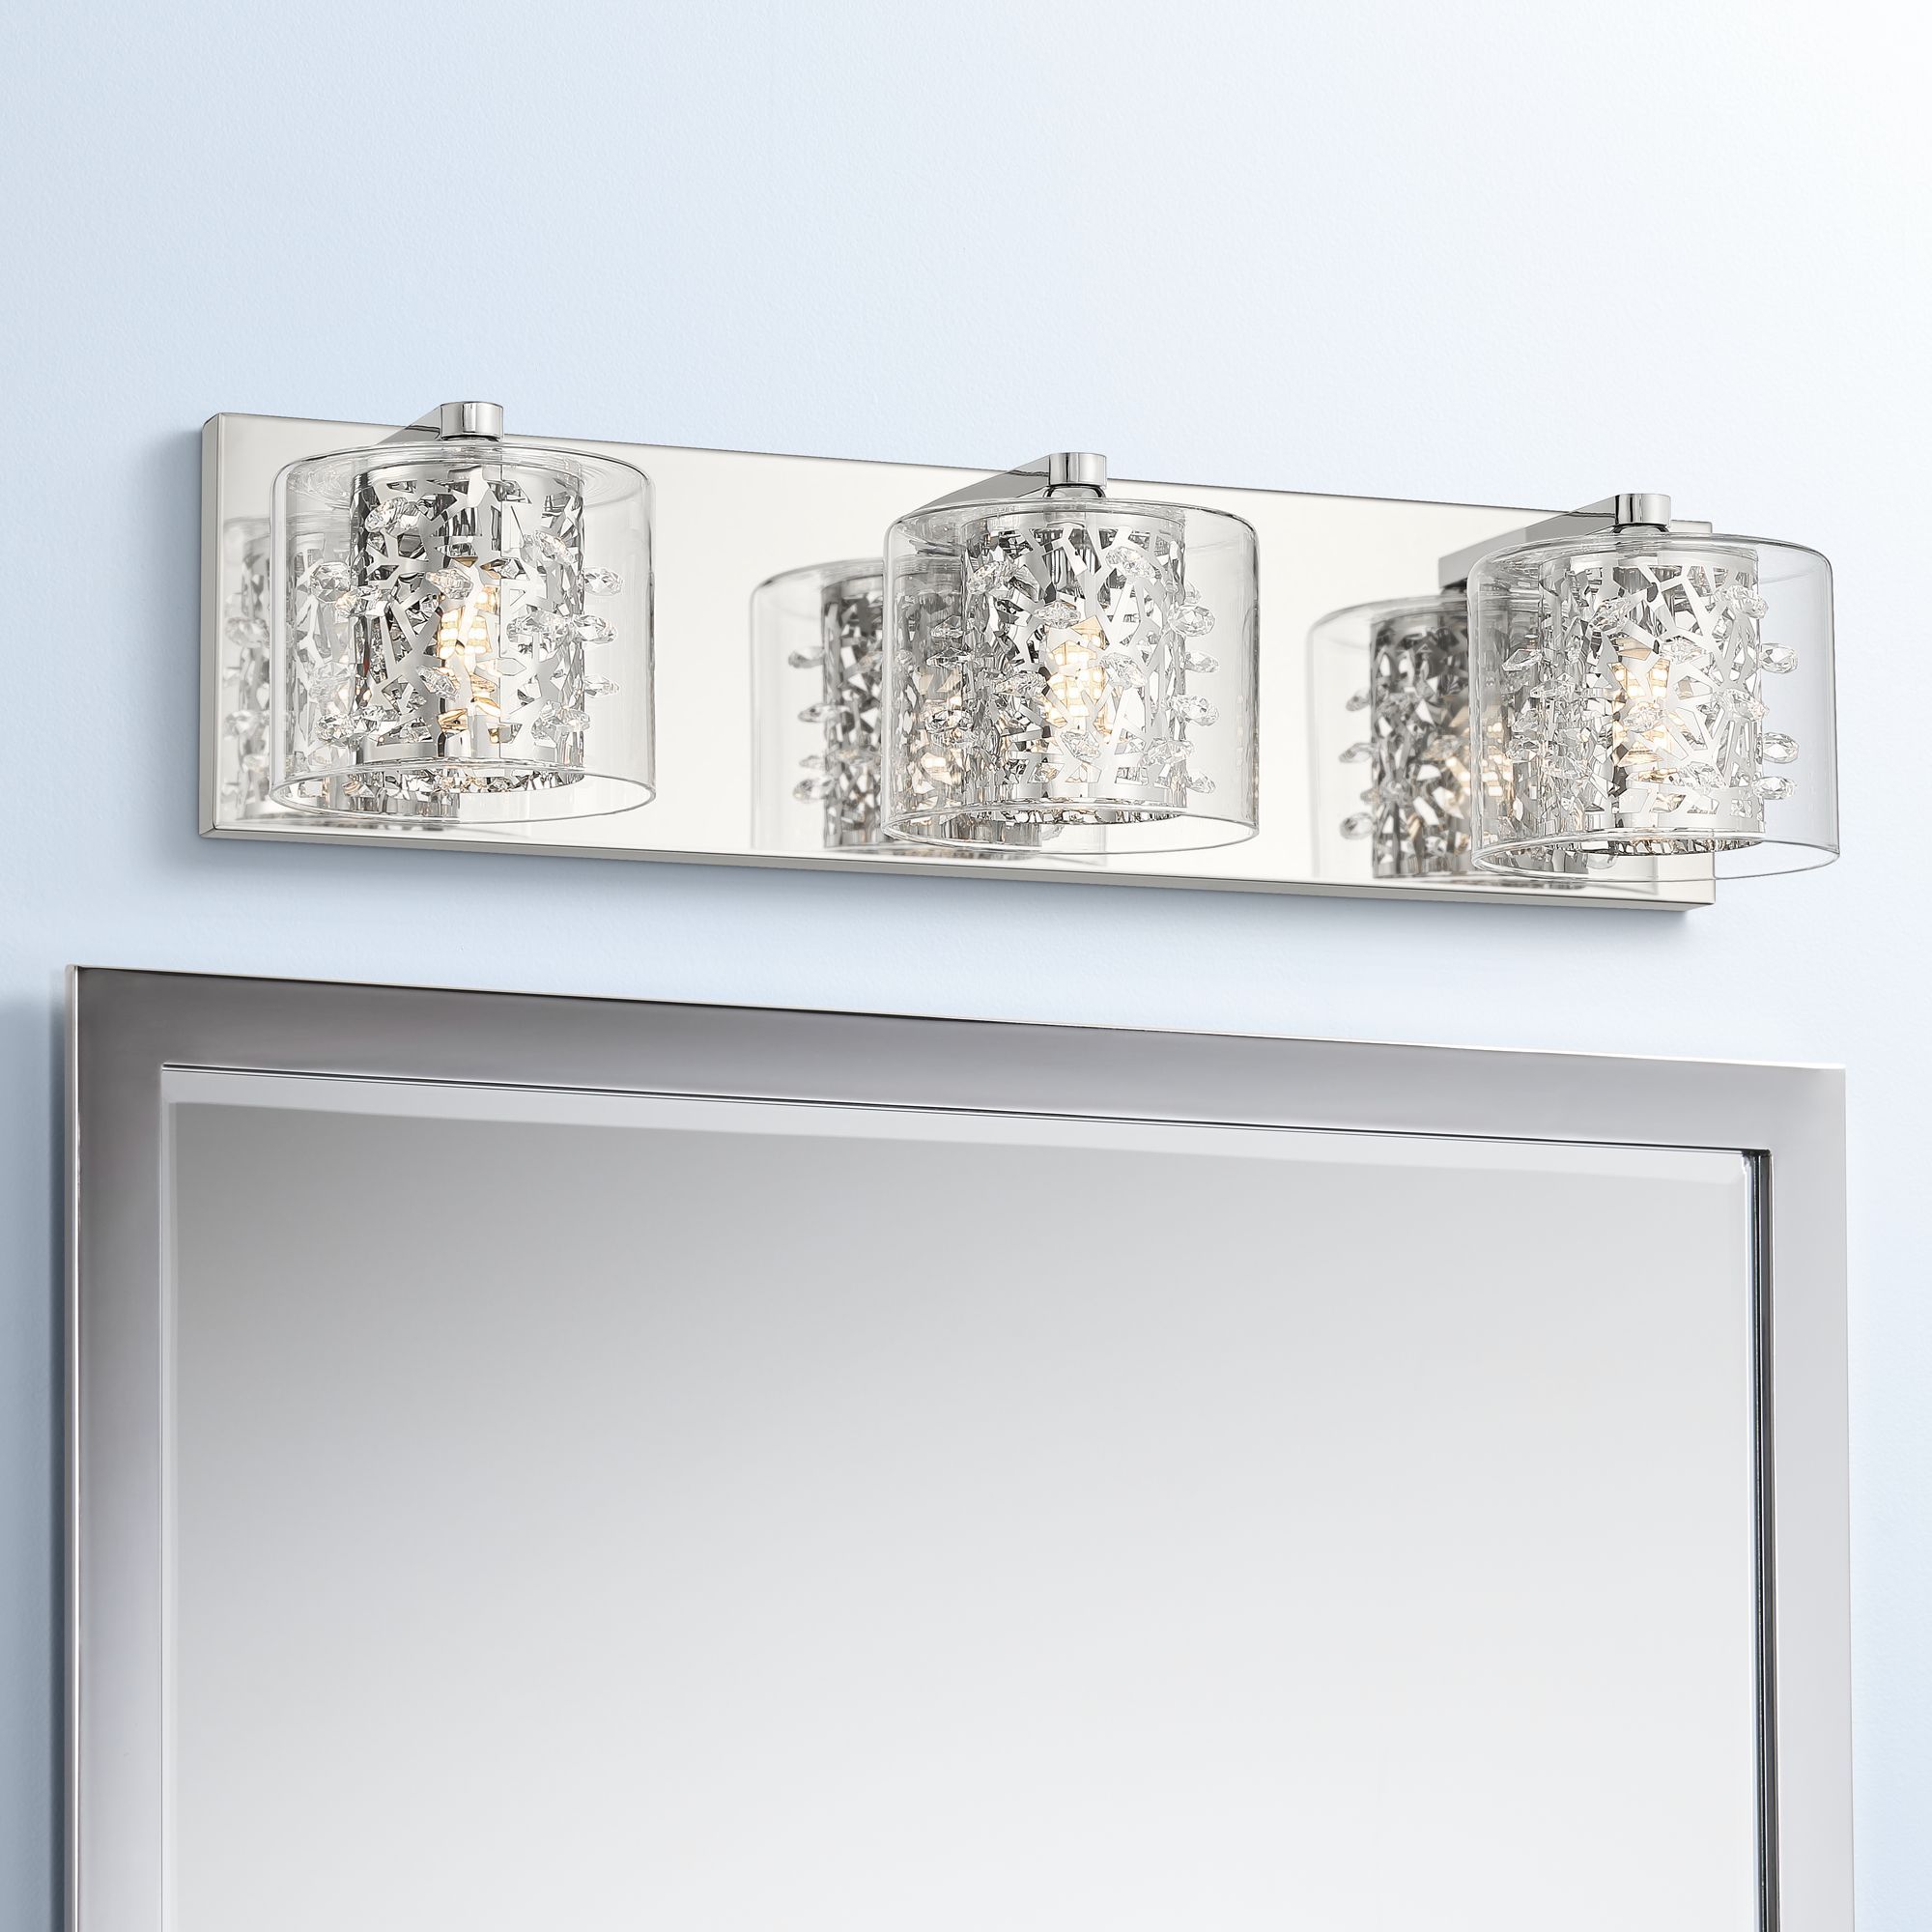 Possini Euro Design Modern Wall Light Led Chrome Hardwired 20 1/2" Wide Intended For Tunable Led Vanity Mirrors (View 14 of 15)